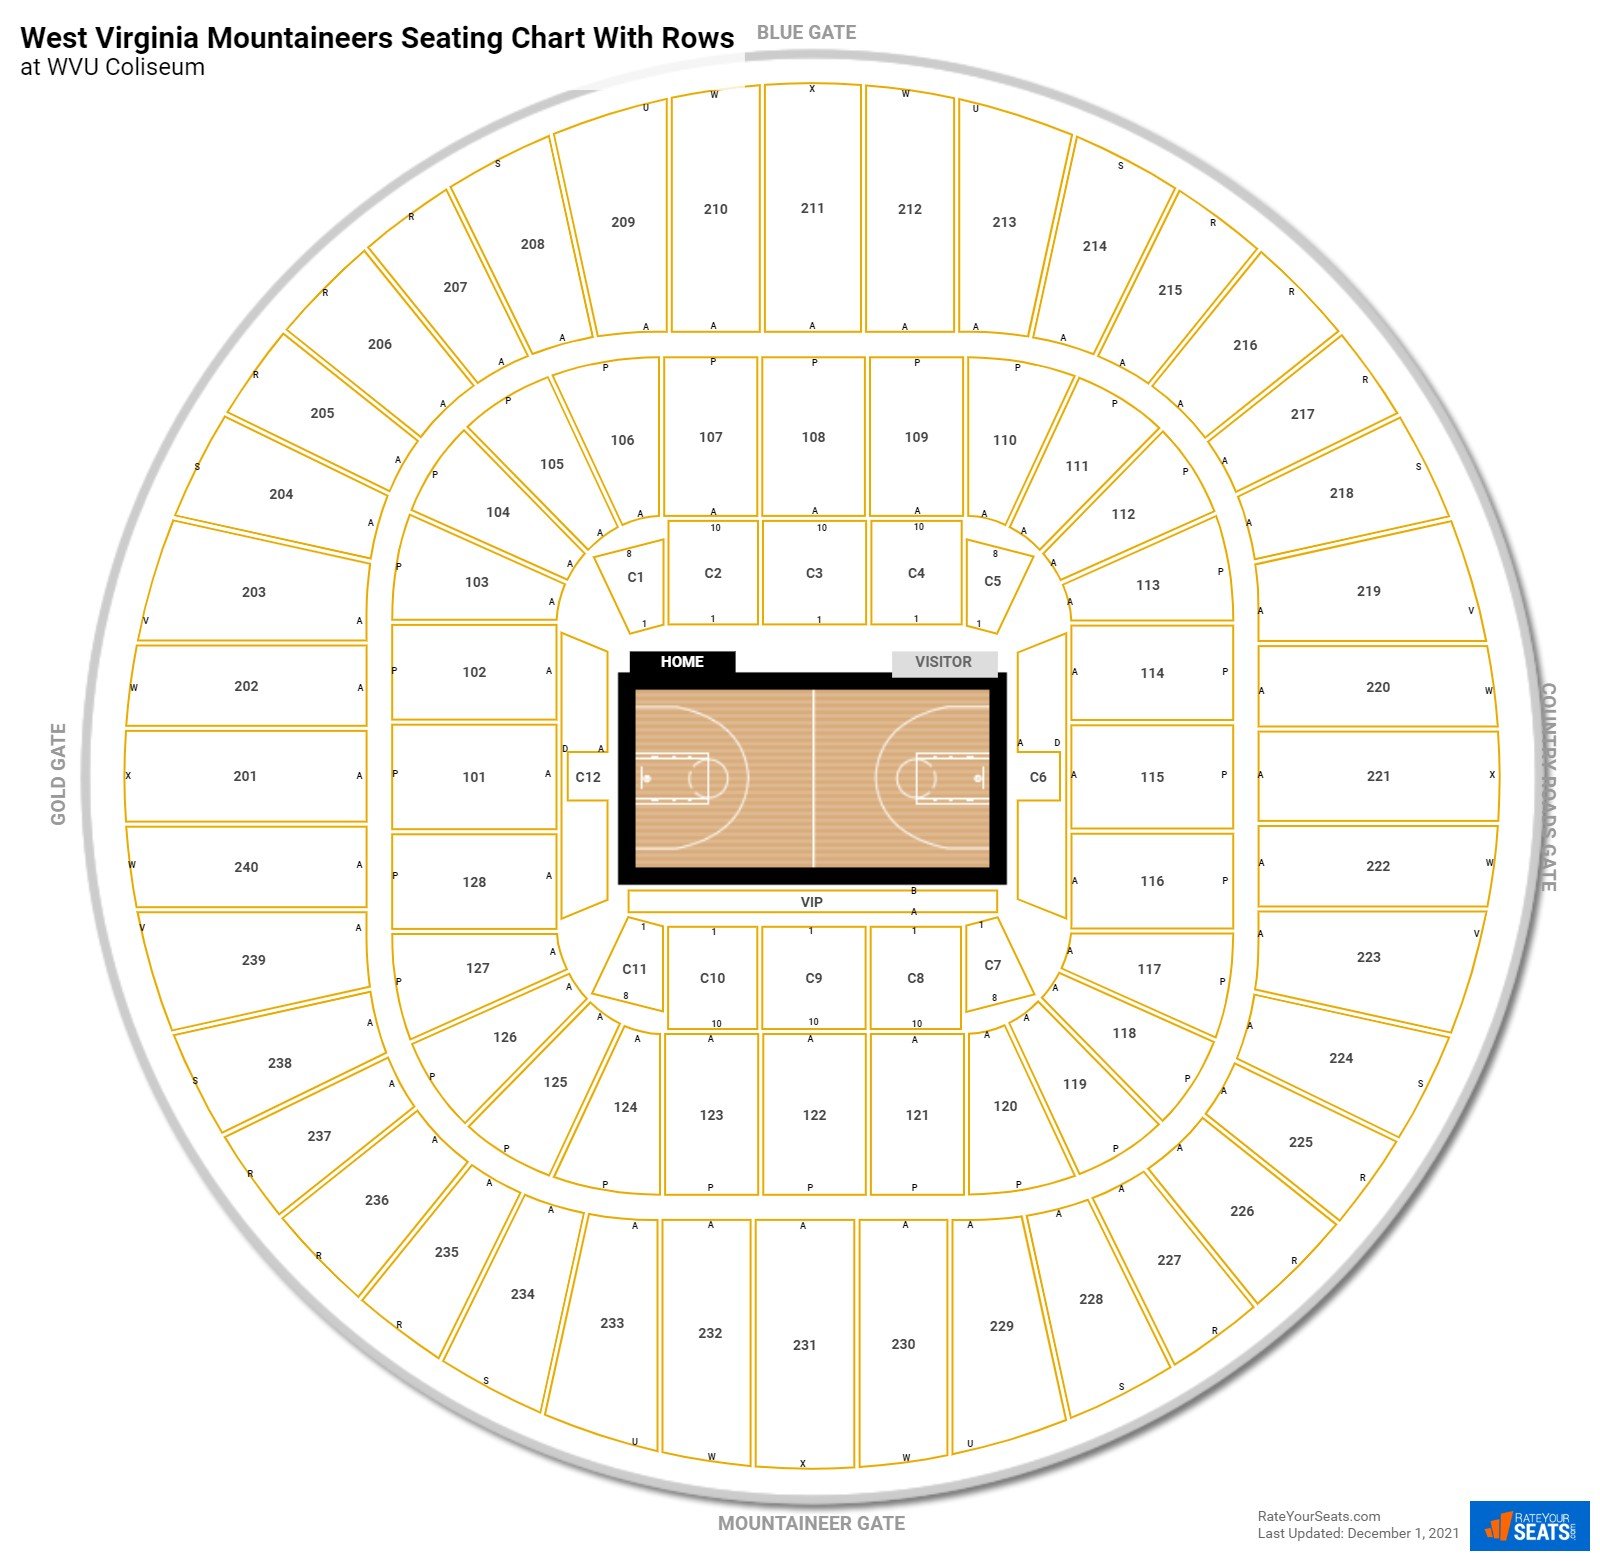 WVU Coliseum seating chart with row numbers